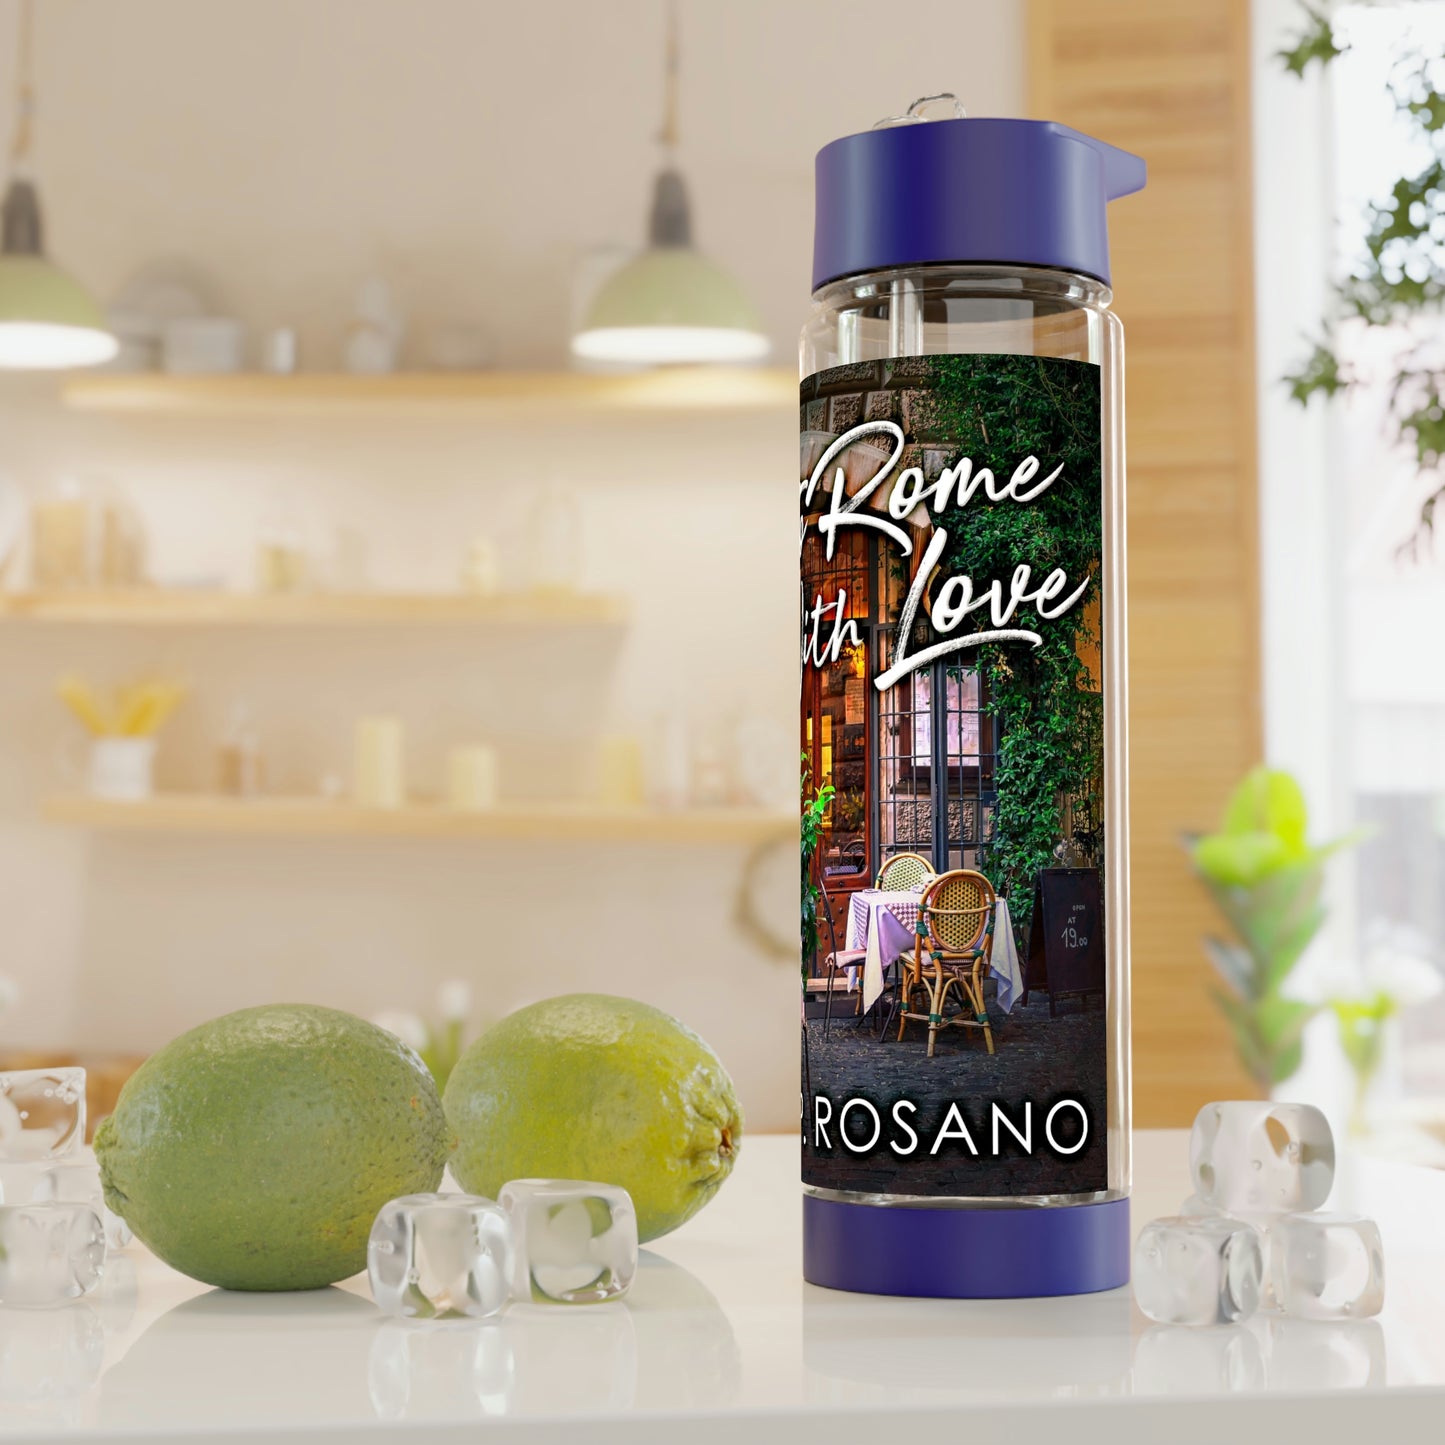 To Rome With Love - Infuser Water Bottle